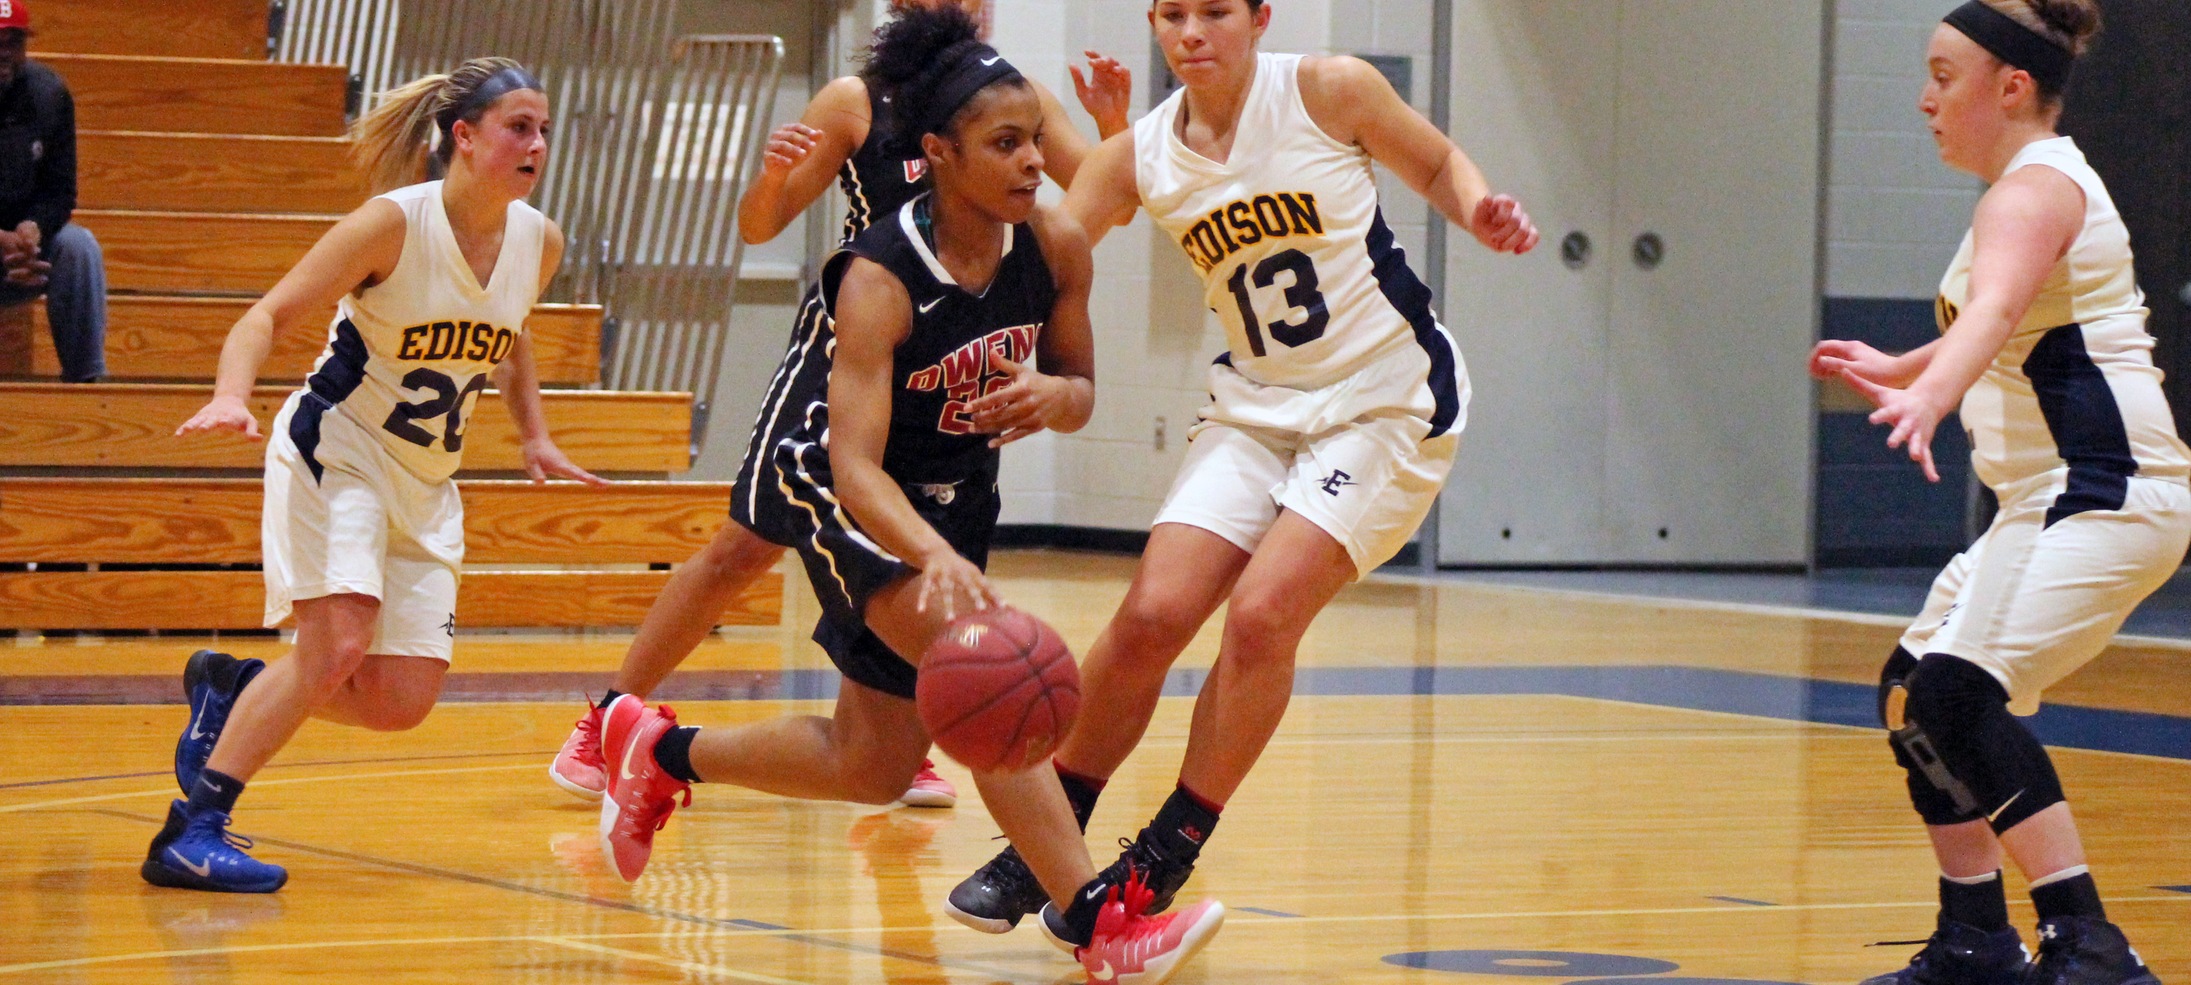 Sybil Roseboro looks to drive the ball as the Edison defense surrounds her. Photo by Nicholas Huenefeld/Owens Sports Information